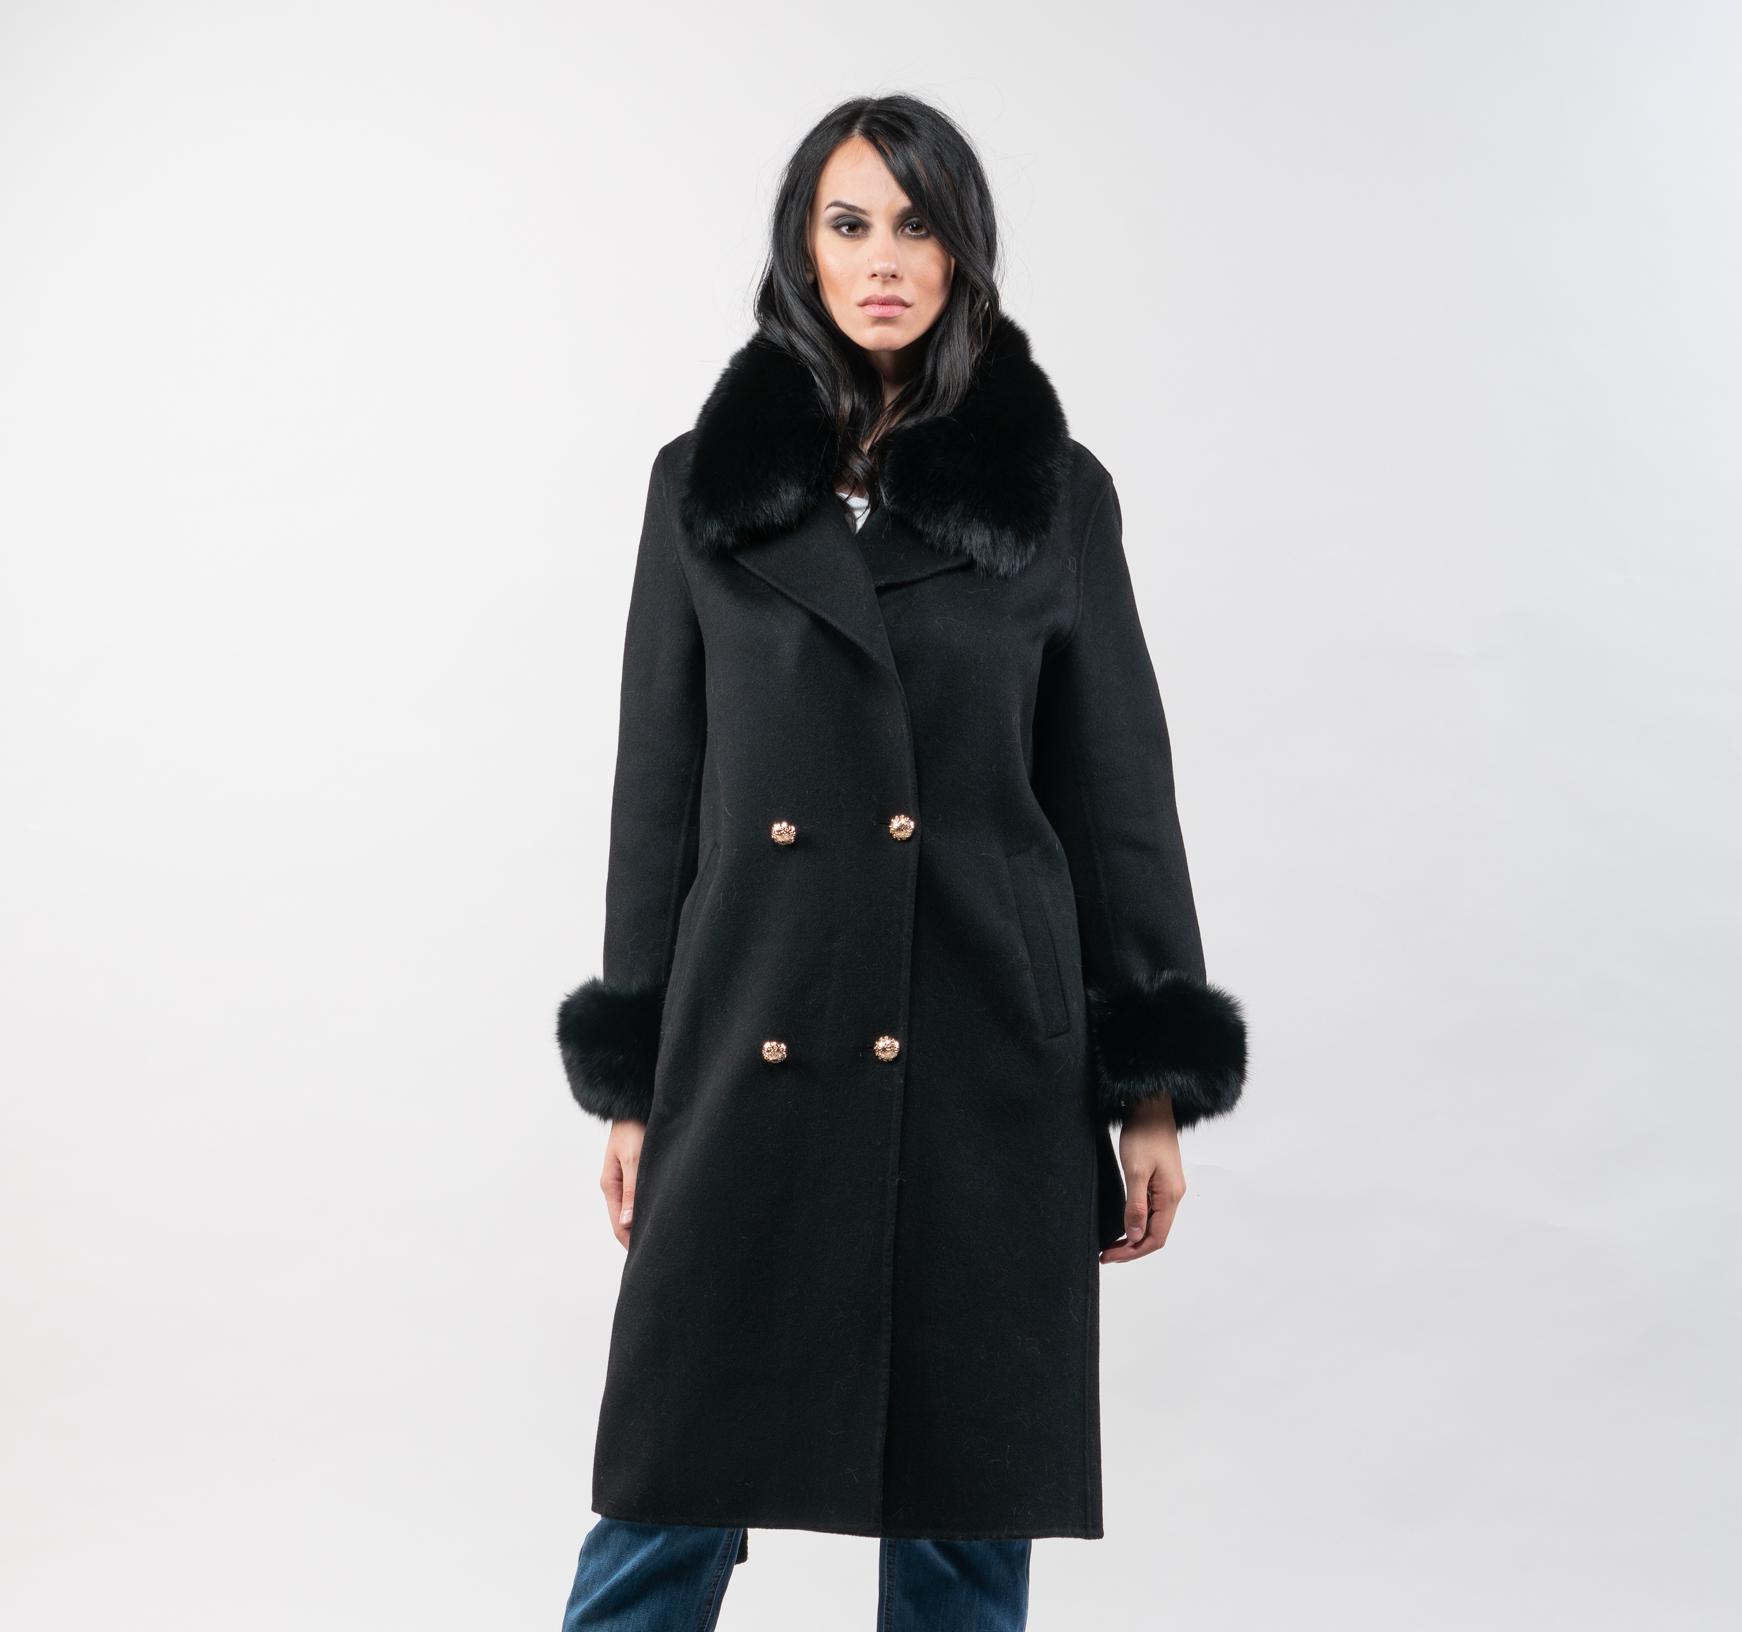 pyramide tale Tomat Black Cashmere Wool Coat With Fur Trim Hood And Cuffs- Haute Acorn